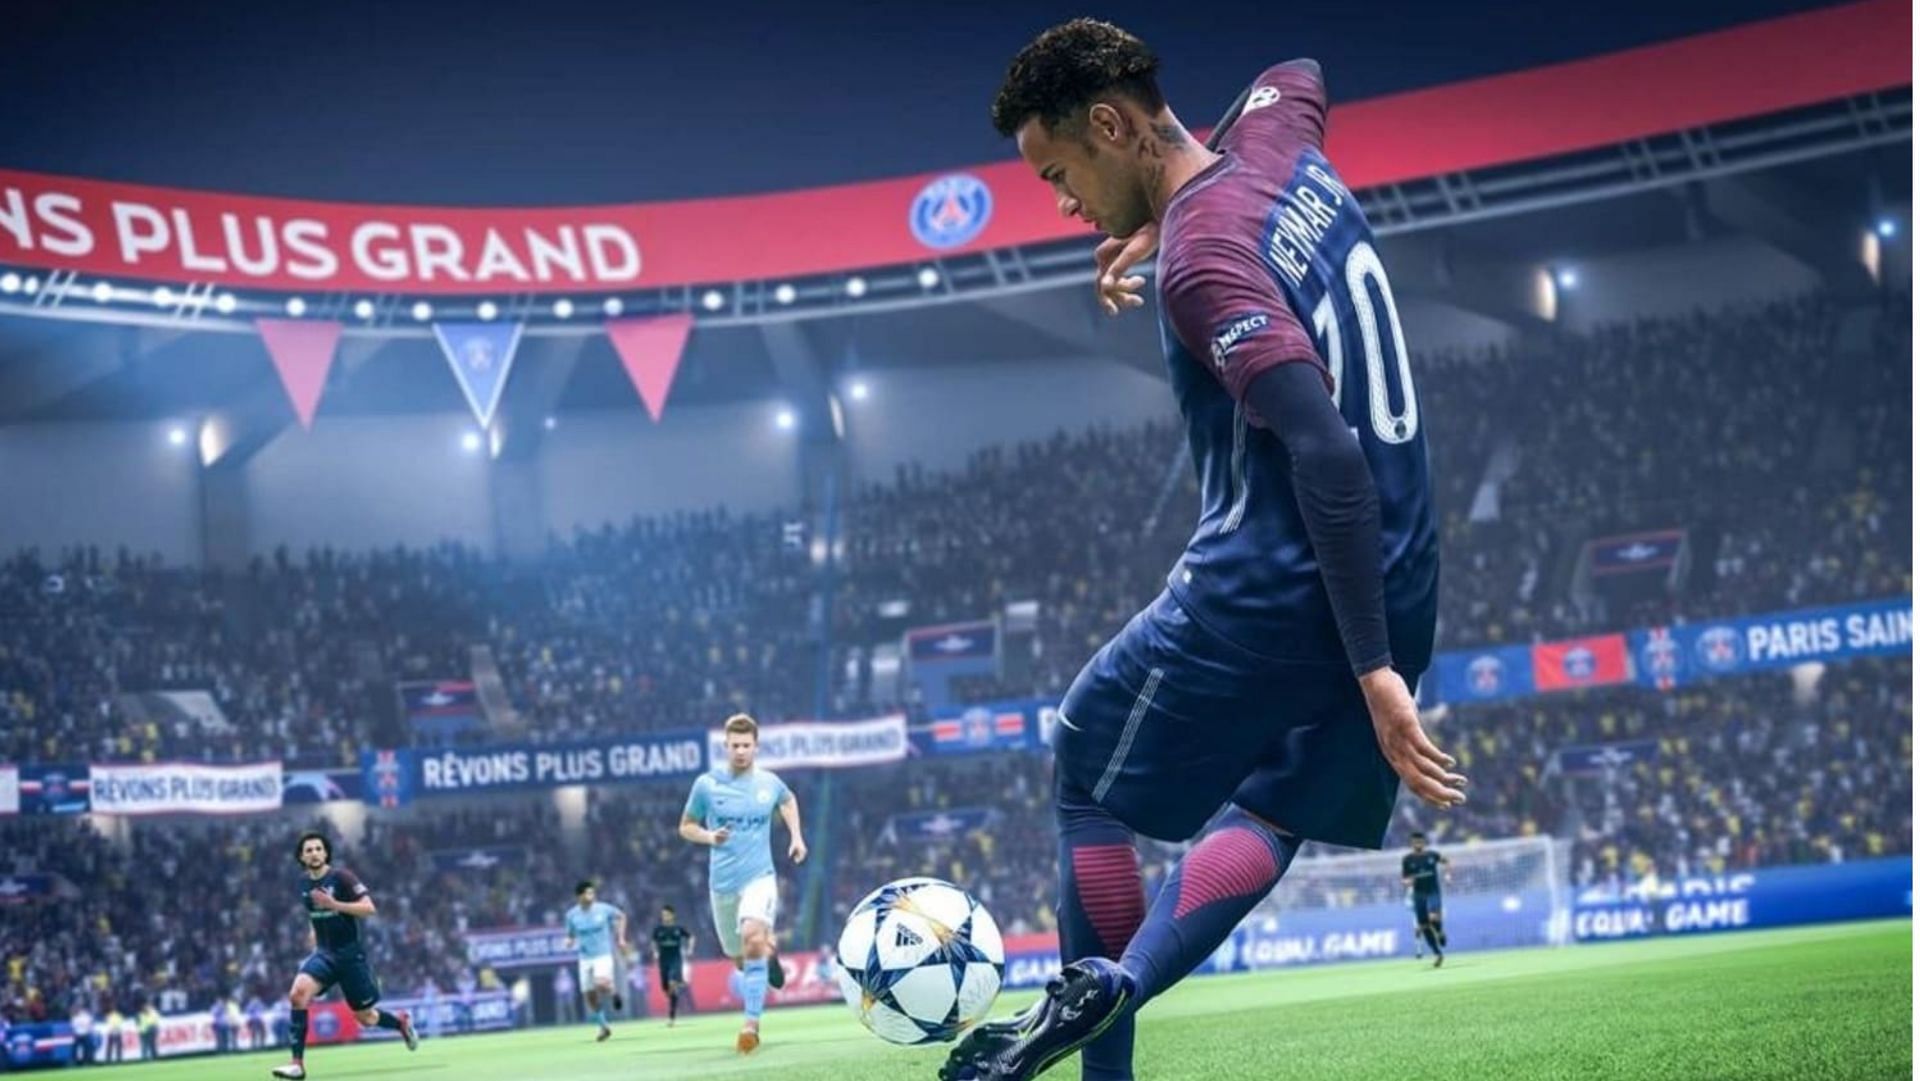 Crossplay has spiced up the contests within the game (Image via EA Sports)